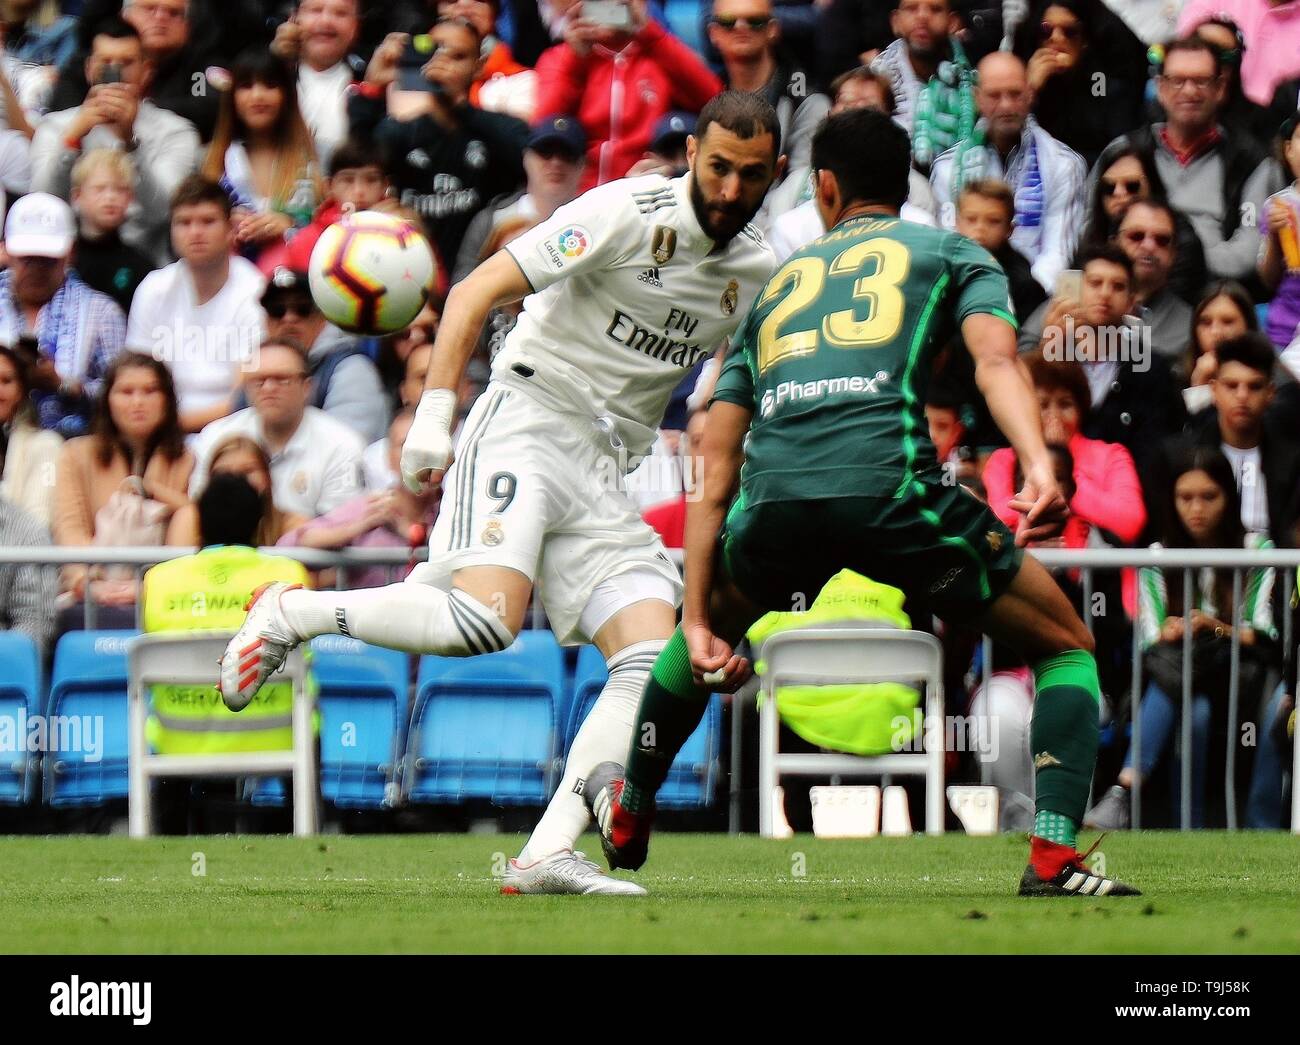 Madrid, Spain. 19th May, 2019. Real Madrid's Karim Benzema (L) competes with Real Betis' Aissa Mandi during a 38th round Spanish league match between Real Madrid and Real Betis in Madrid, Spain, on May 19, 2019. Real Madrid lost 0-2. Credit: Edward F. Peters/Xinhua/Alamy Live News Stock Photo